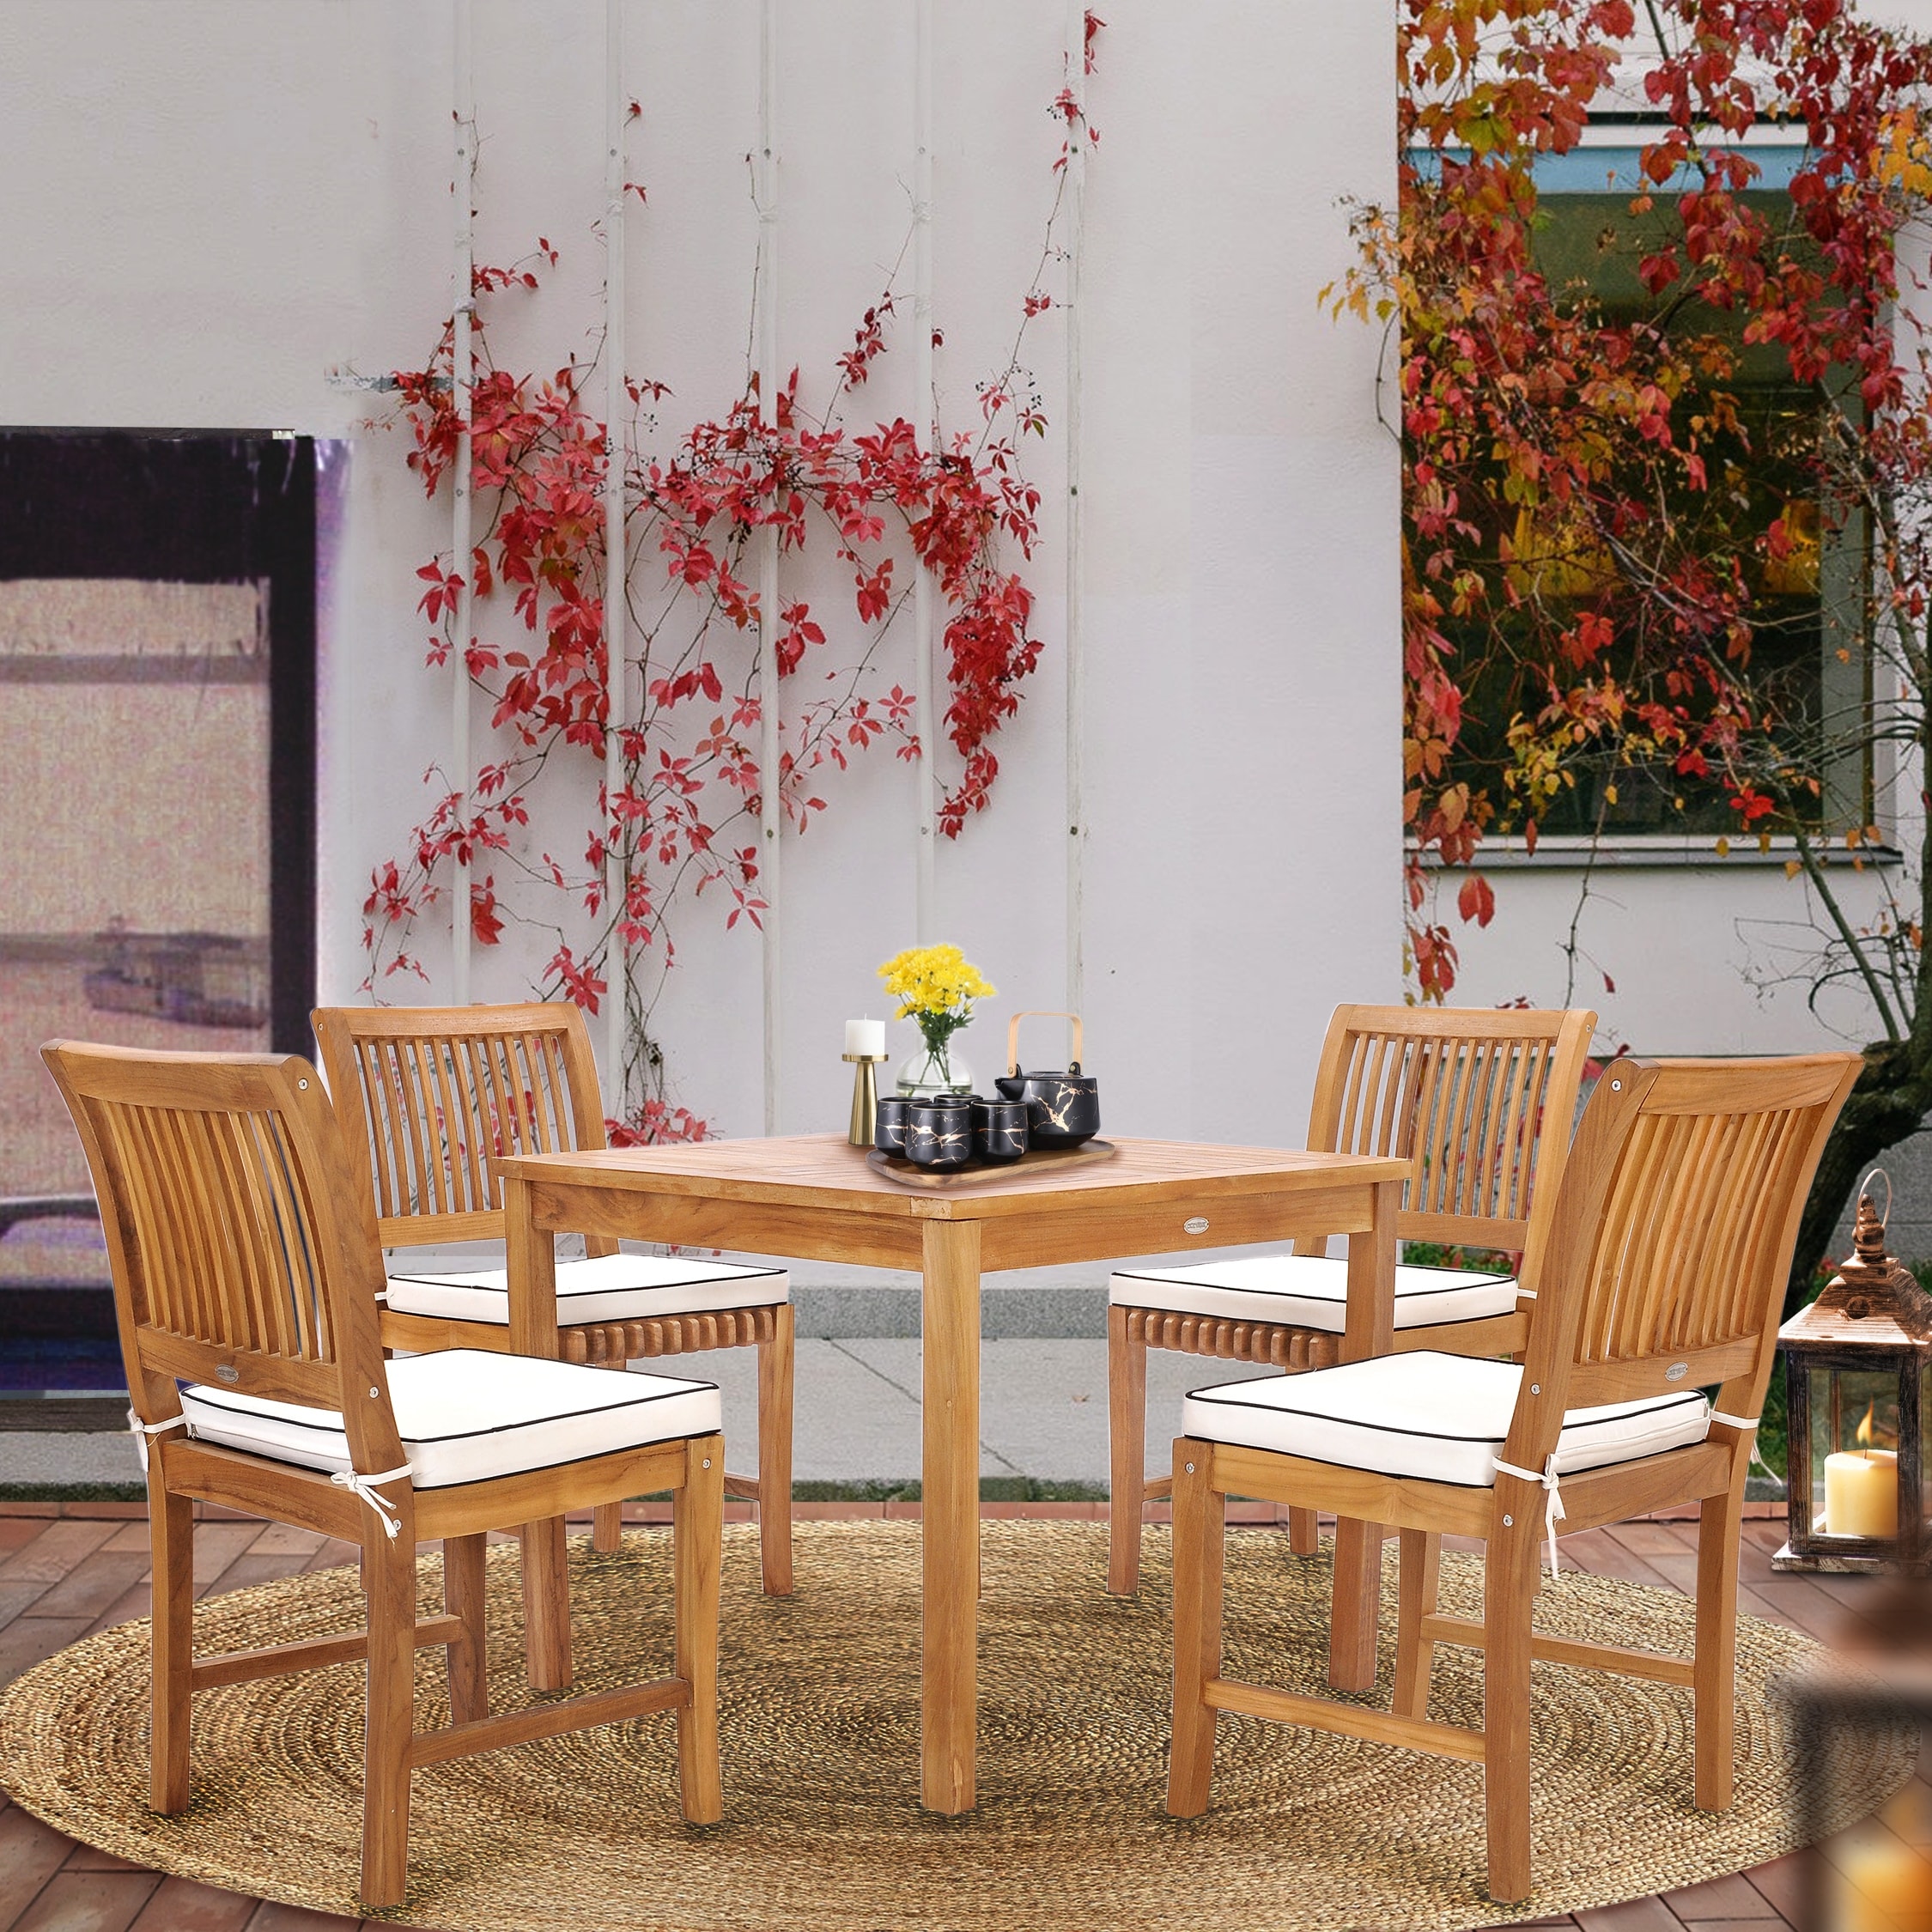 Chic Teak 5 Piece Teak Wood Florence Bistro Dining Set Including 35 Square Table And 4 Side Chairs